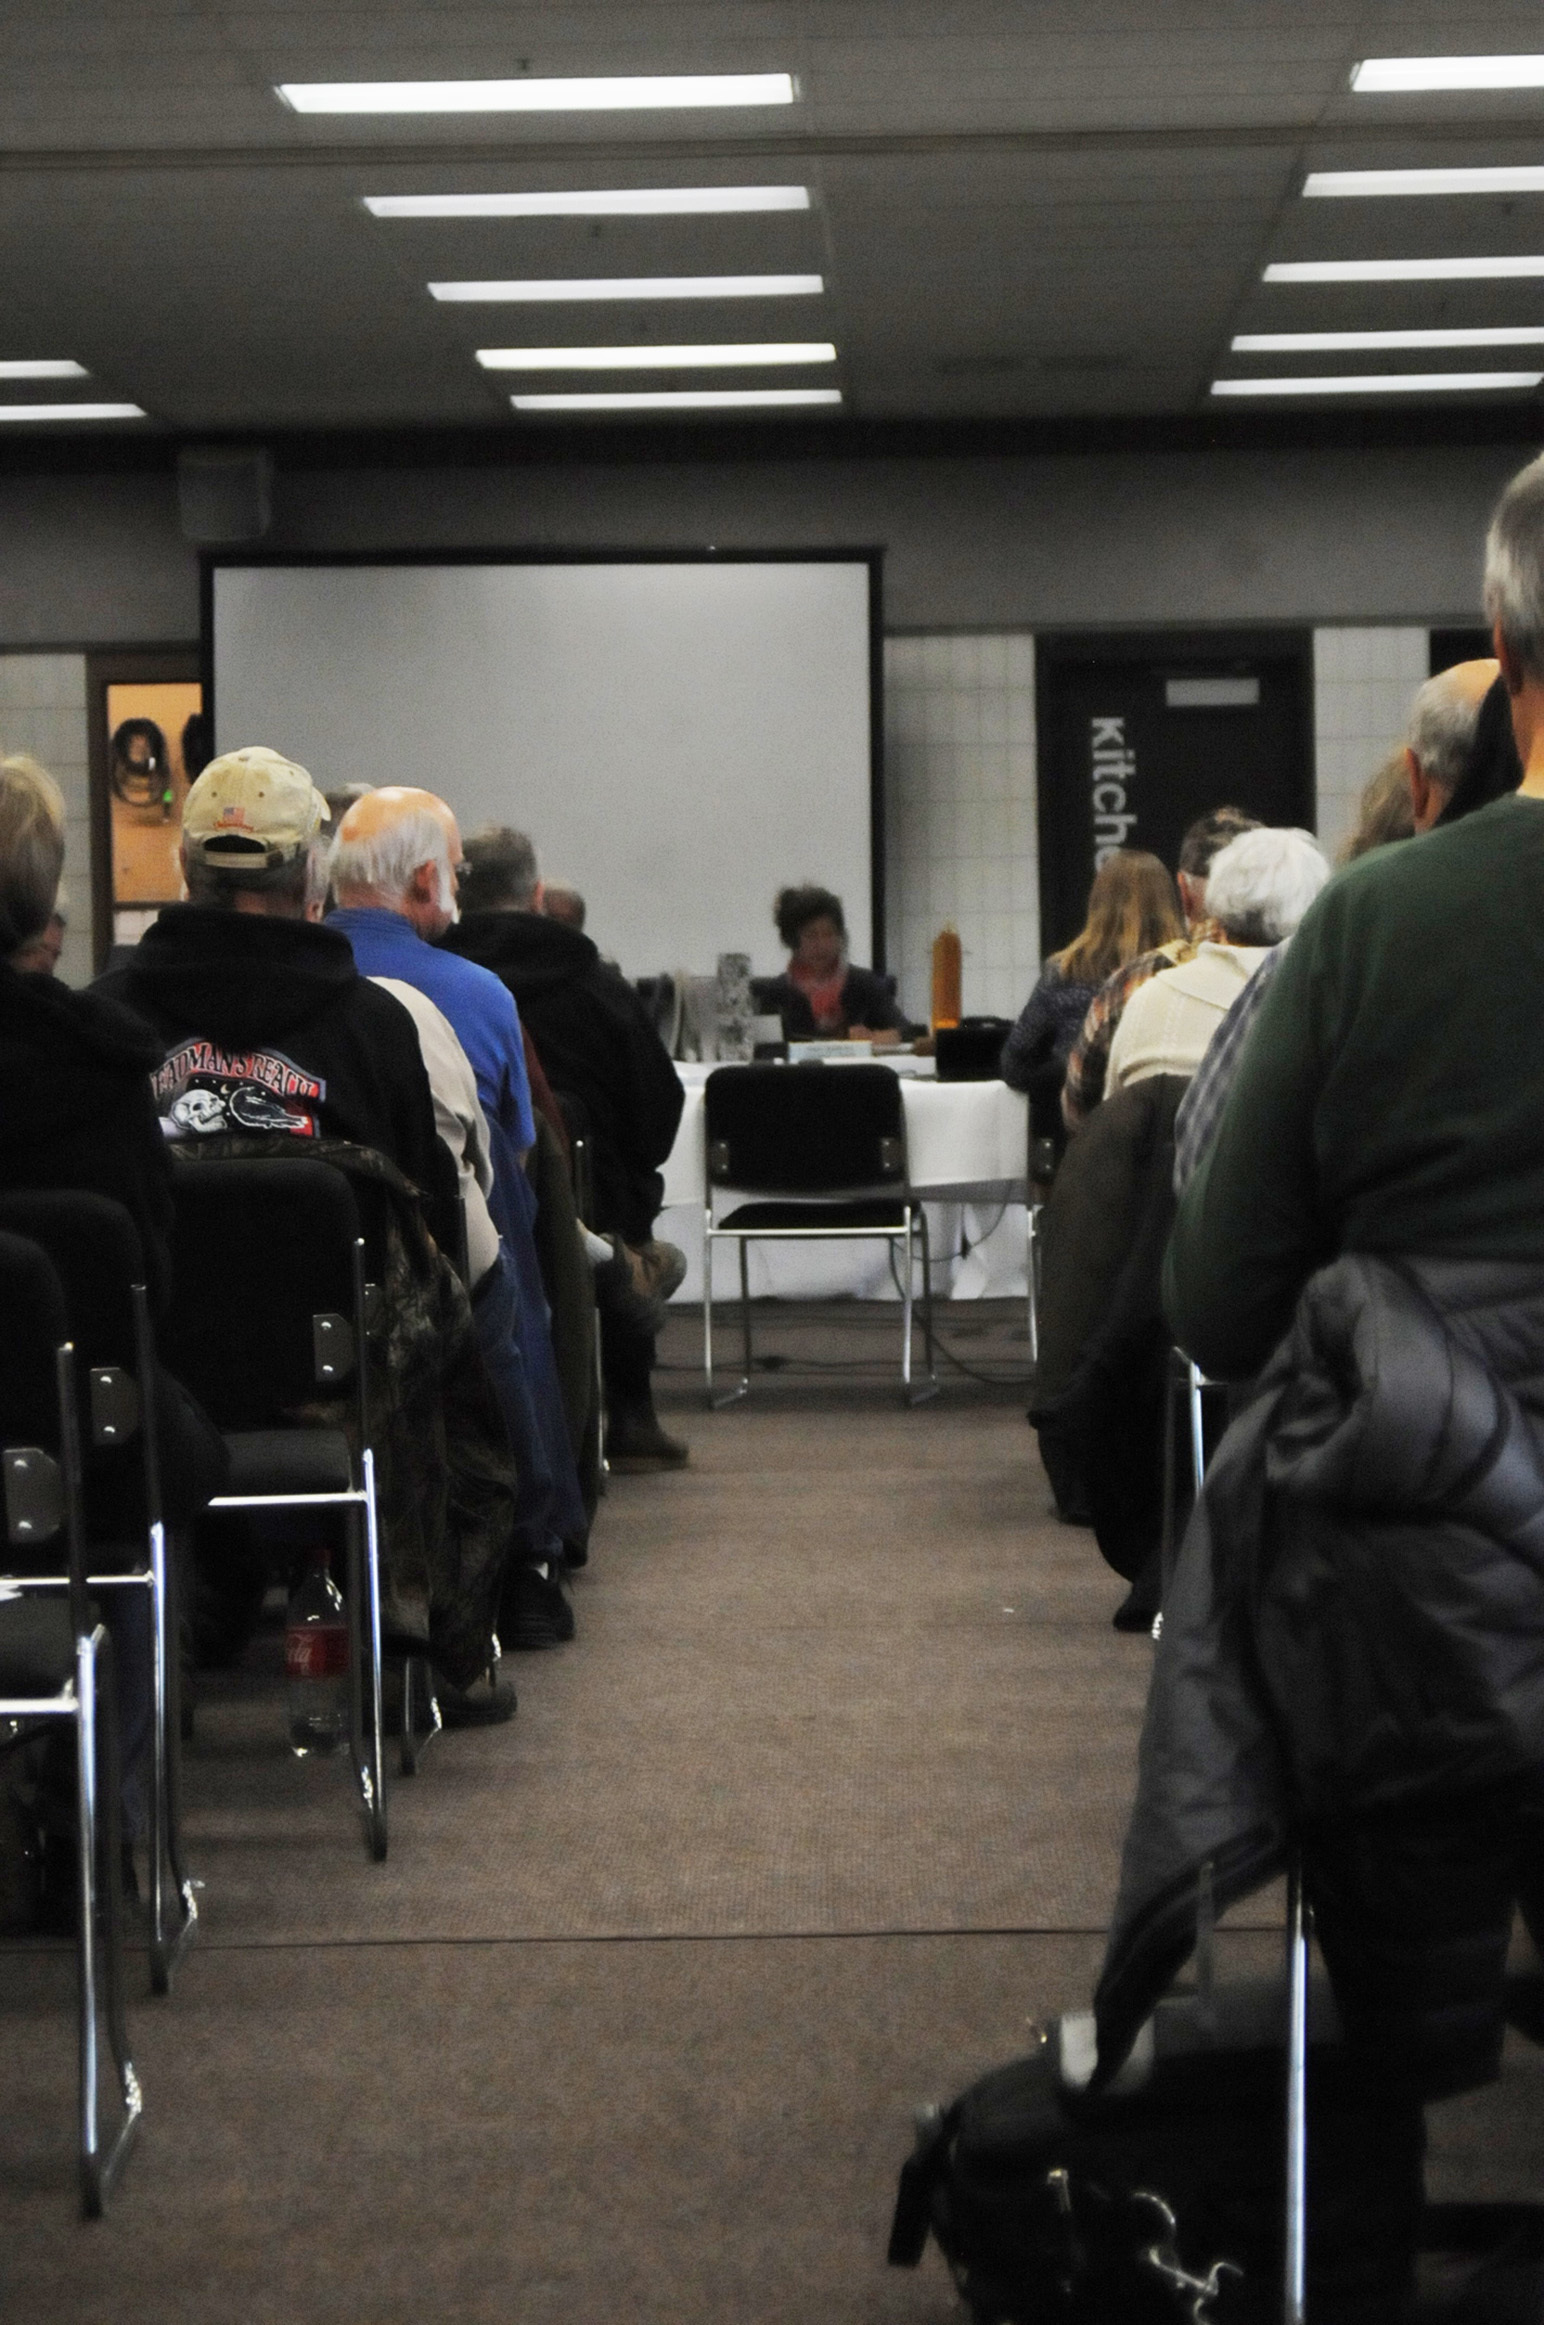 Dozens of people from around Alaska turned out for the Board of Fisheries' worksession to comment on fisheries issues Tuesday, Oct. 17, 2016 in Soldotna, Alaska. (Elizabeth Earl/Peninsula Clarion, file)